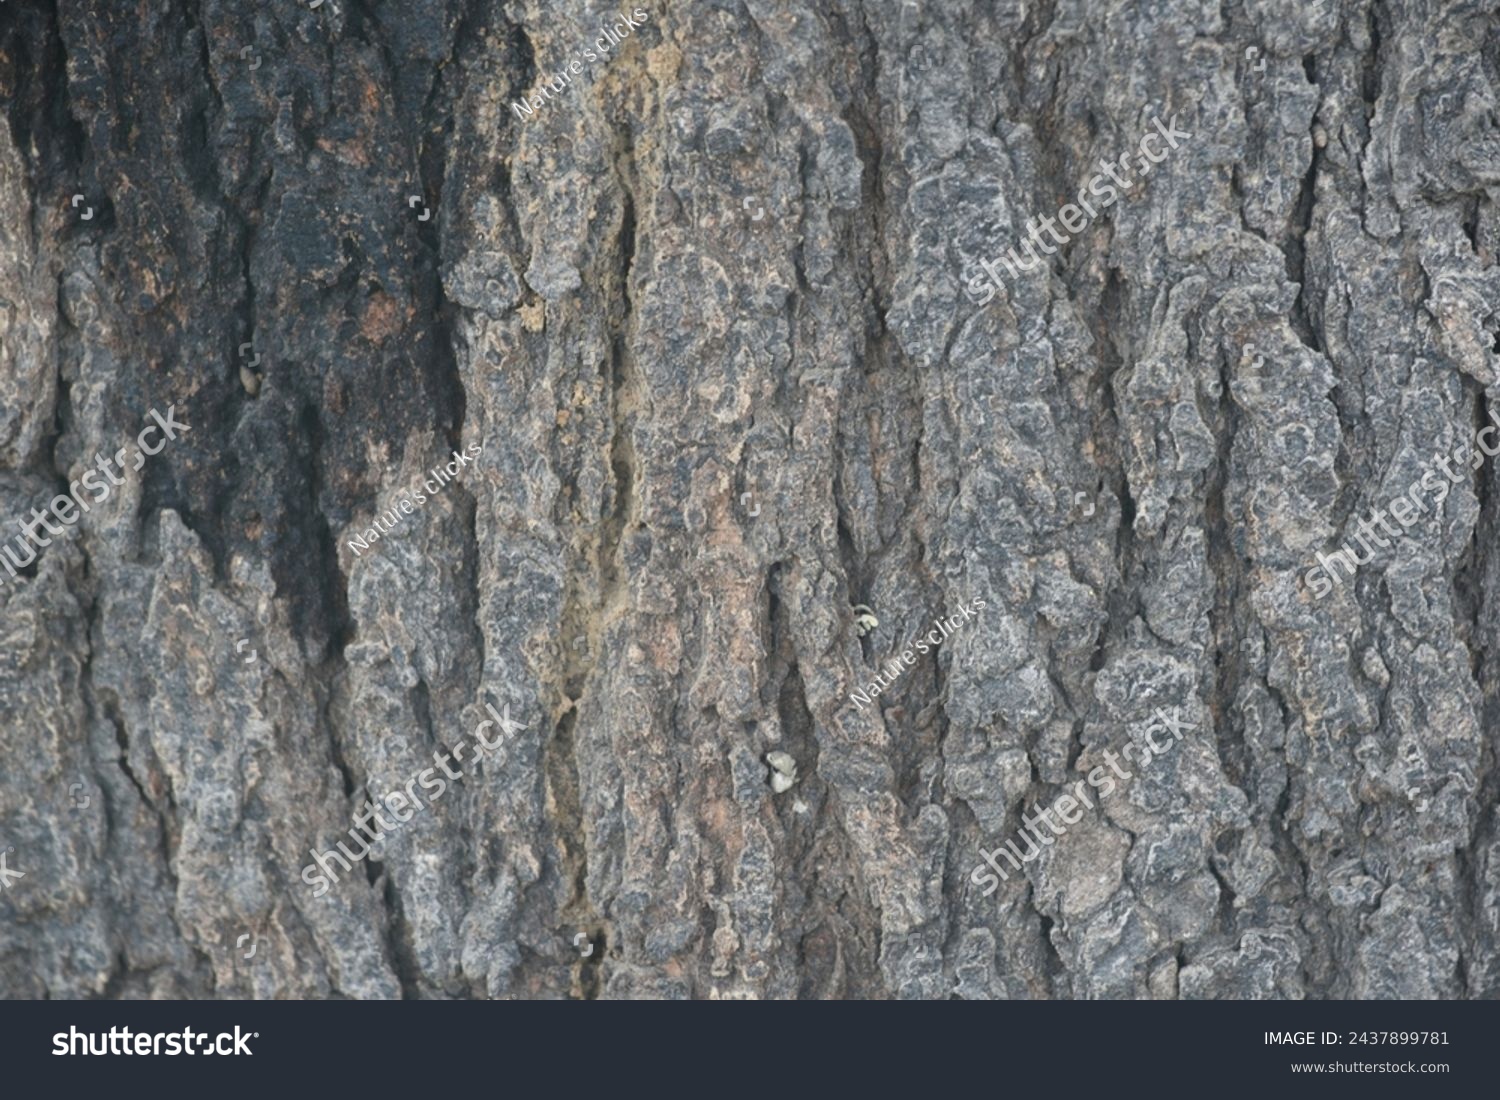 Old tree texture. Bark pattern, For background wood work, Bark of brown hardwood, thick bark hardwood, residential house wood. nature, tree, bark, hardwood, trunk, tree , tree trunk close up texture #2437899781